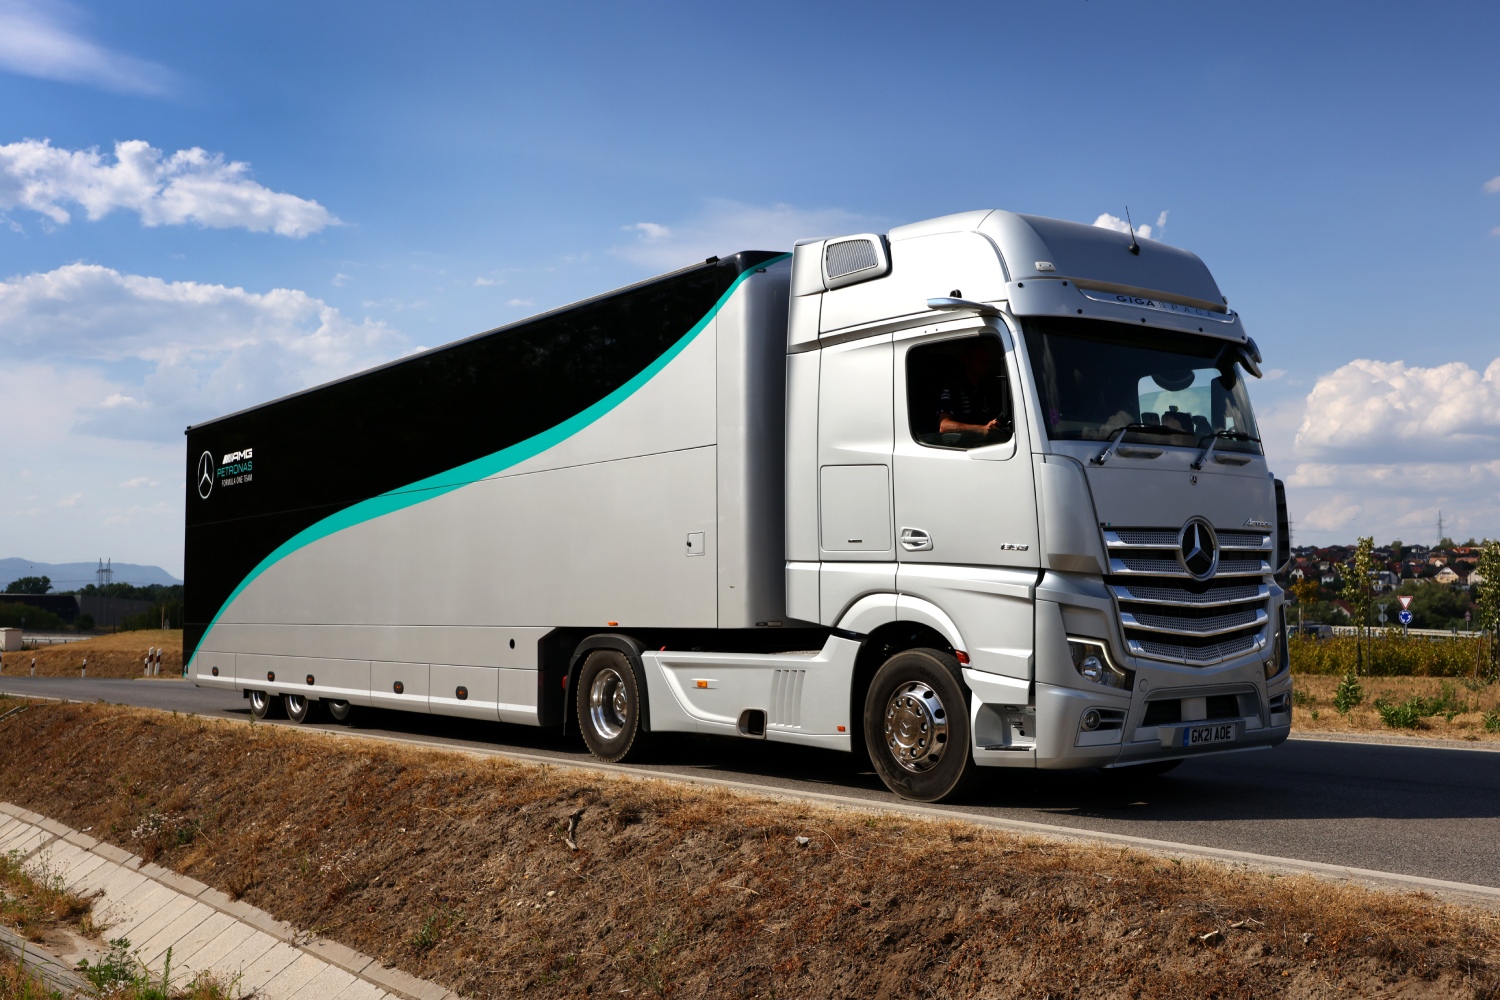 The Mercedes-AMG Formula 1 Team truck switched to biofuel for a trial